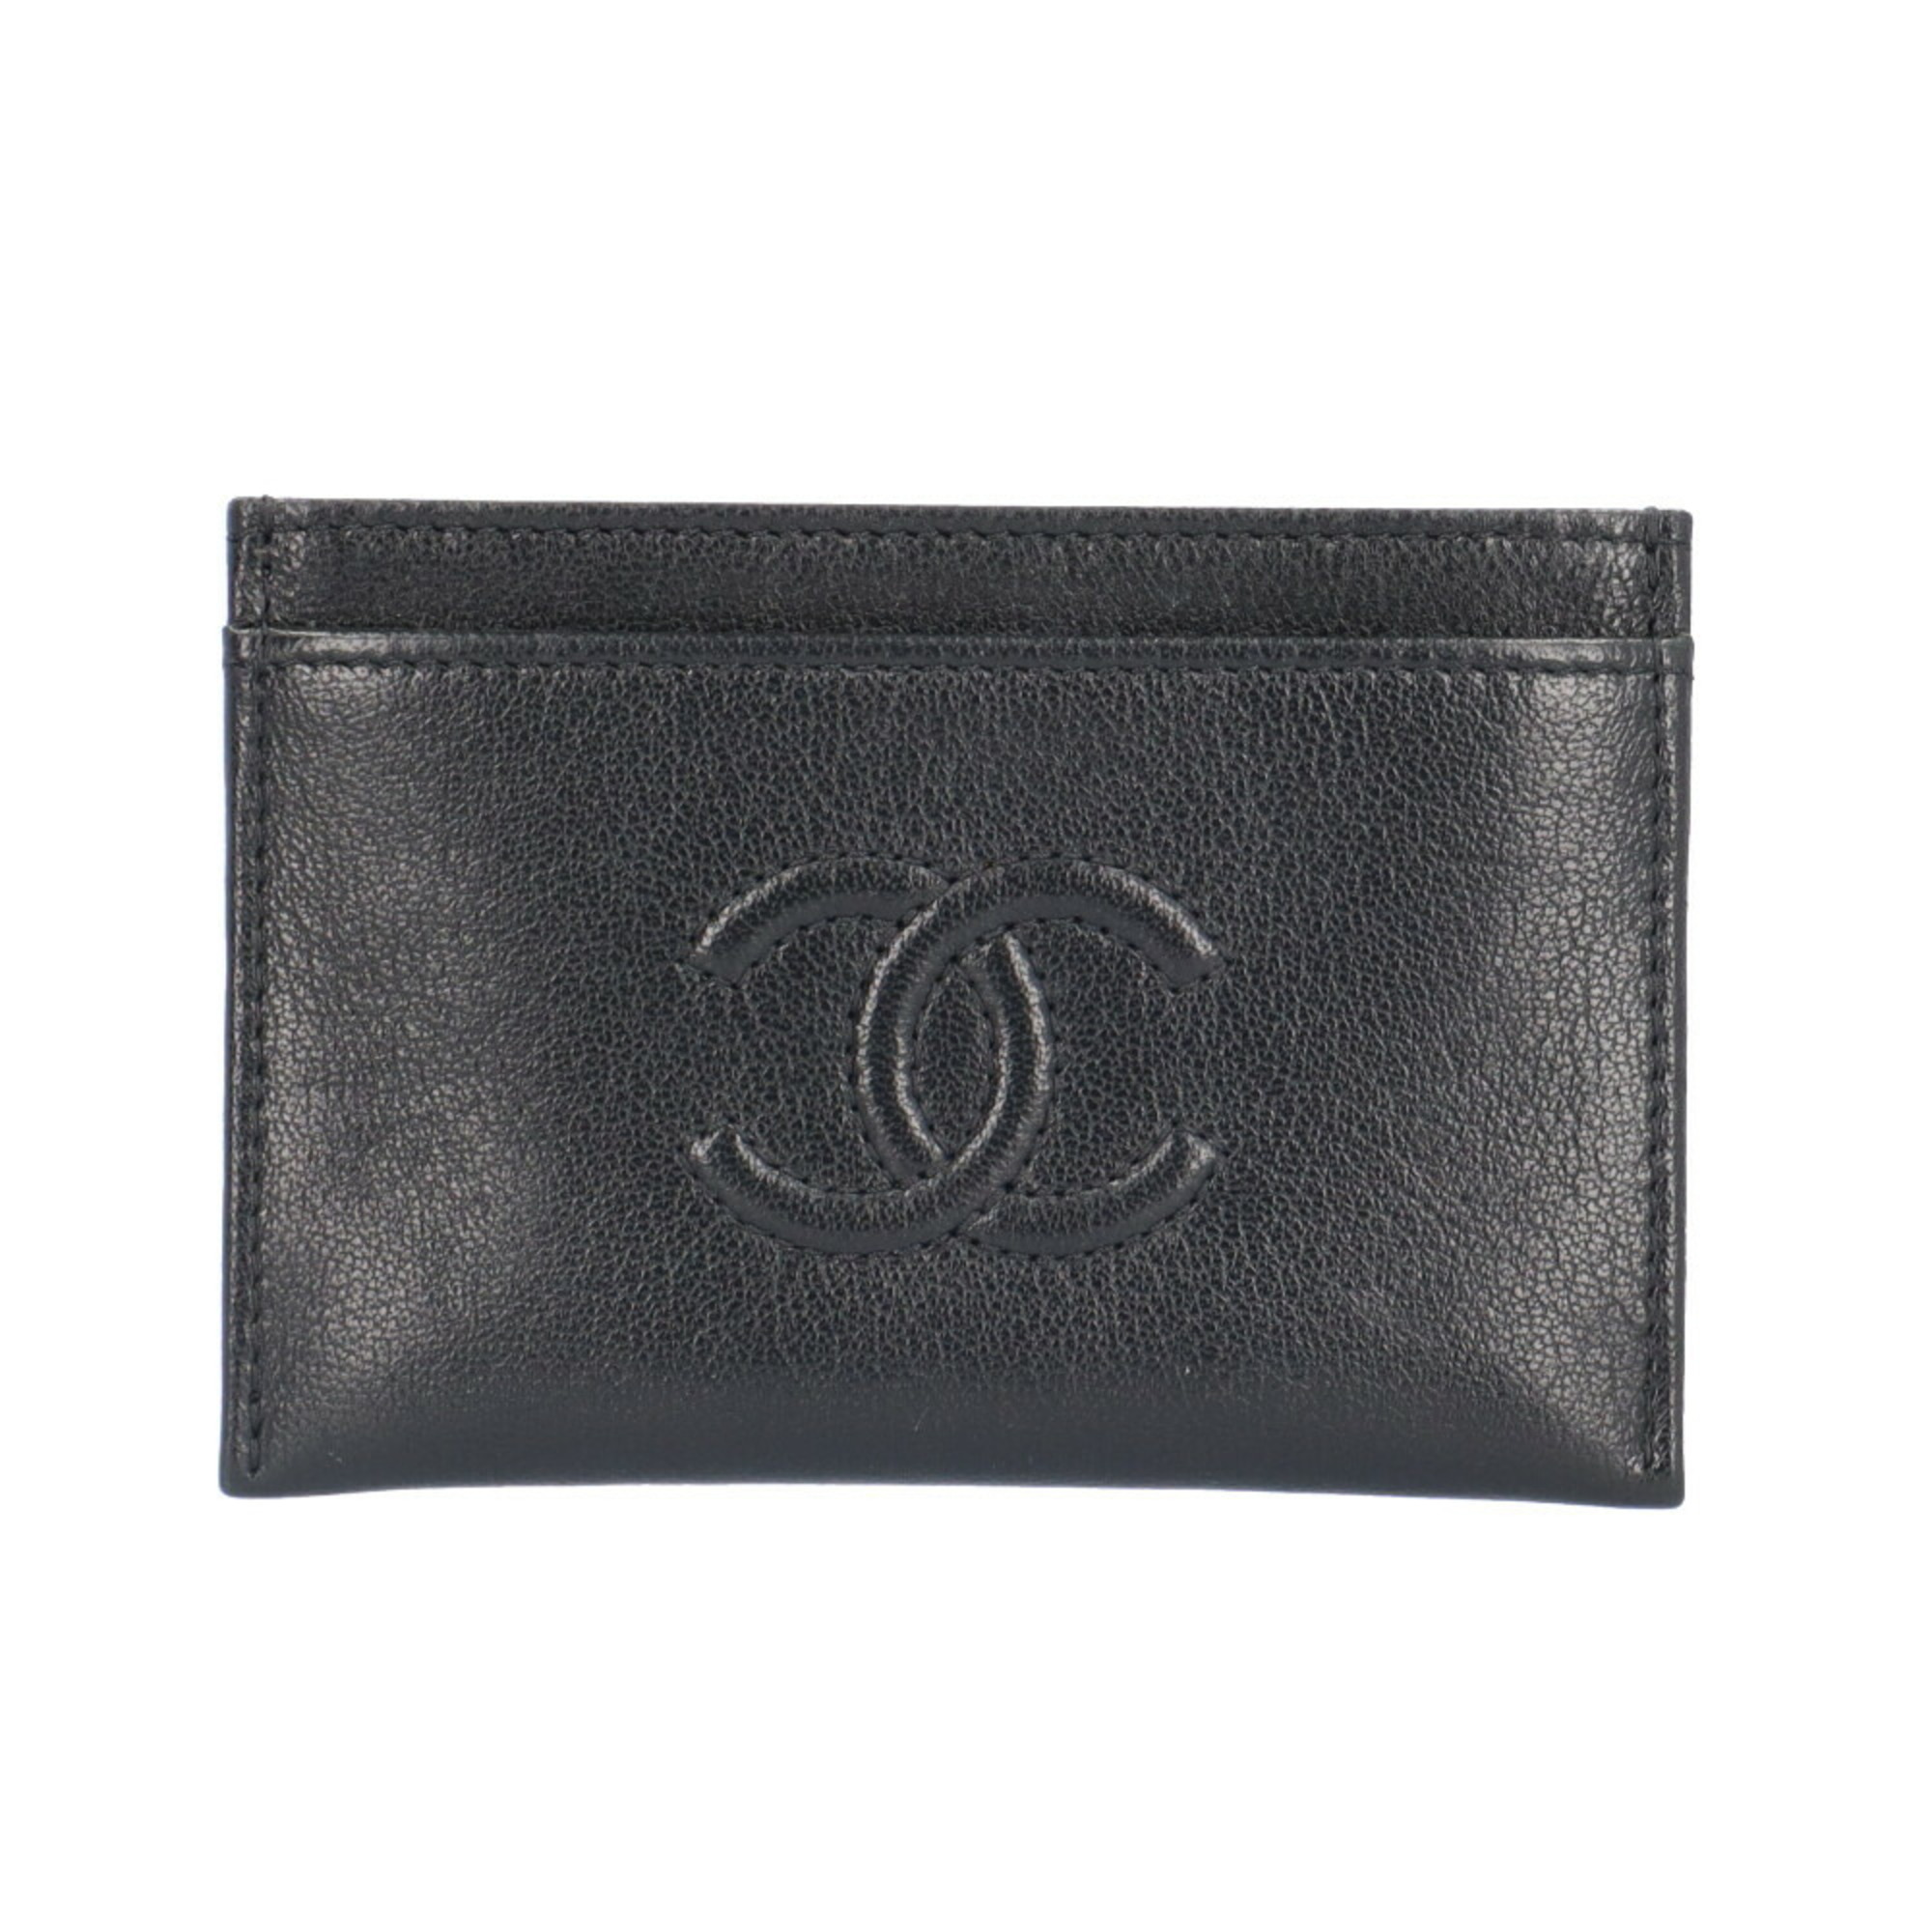 CHANEL CARD CASE LEATHER WOMEN'S